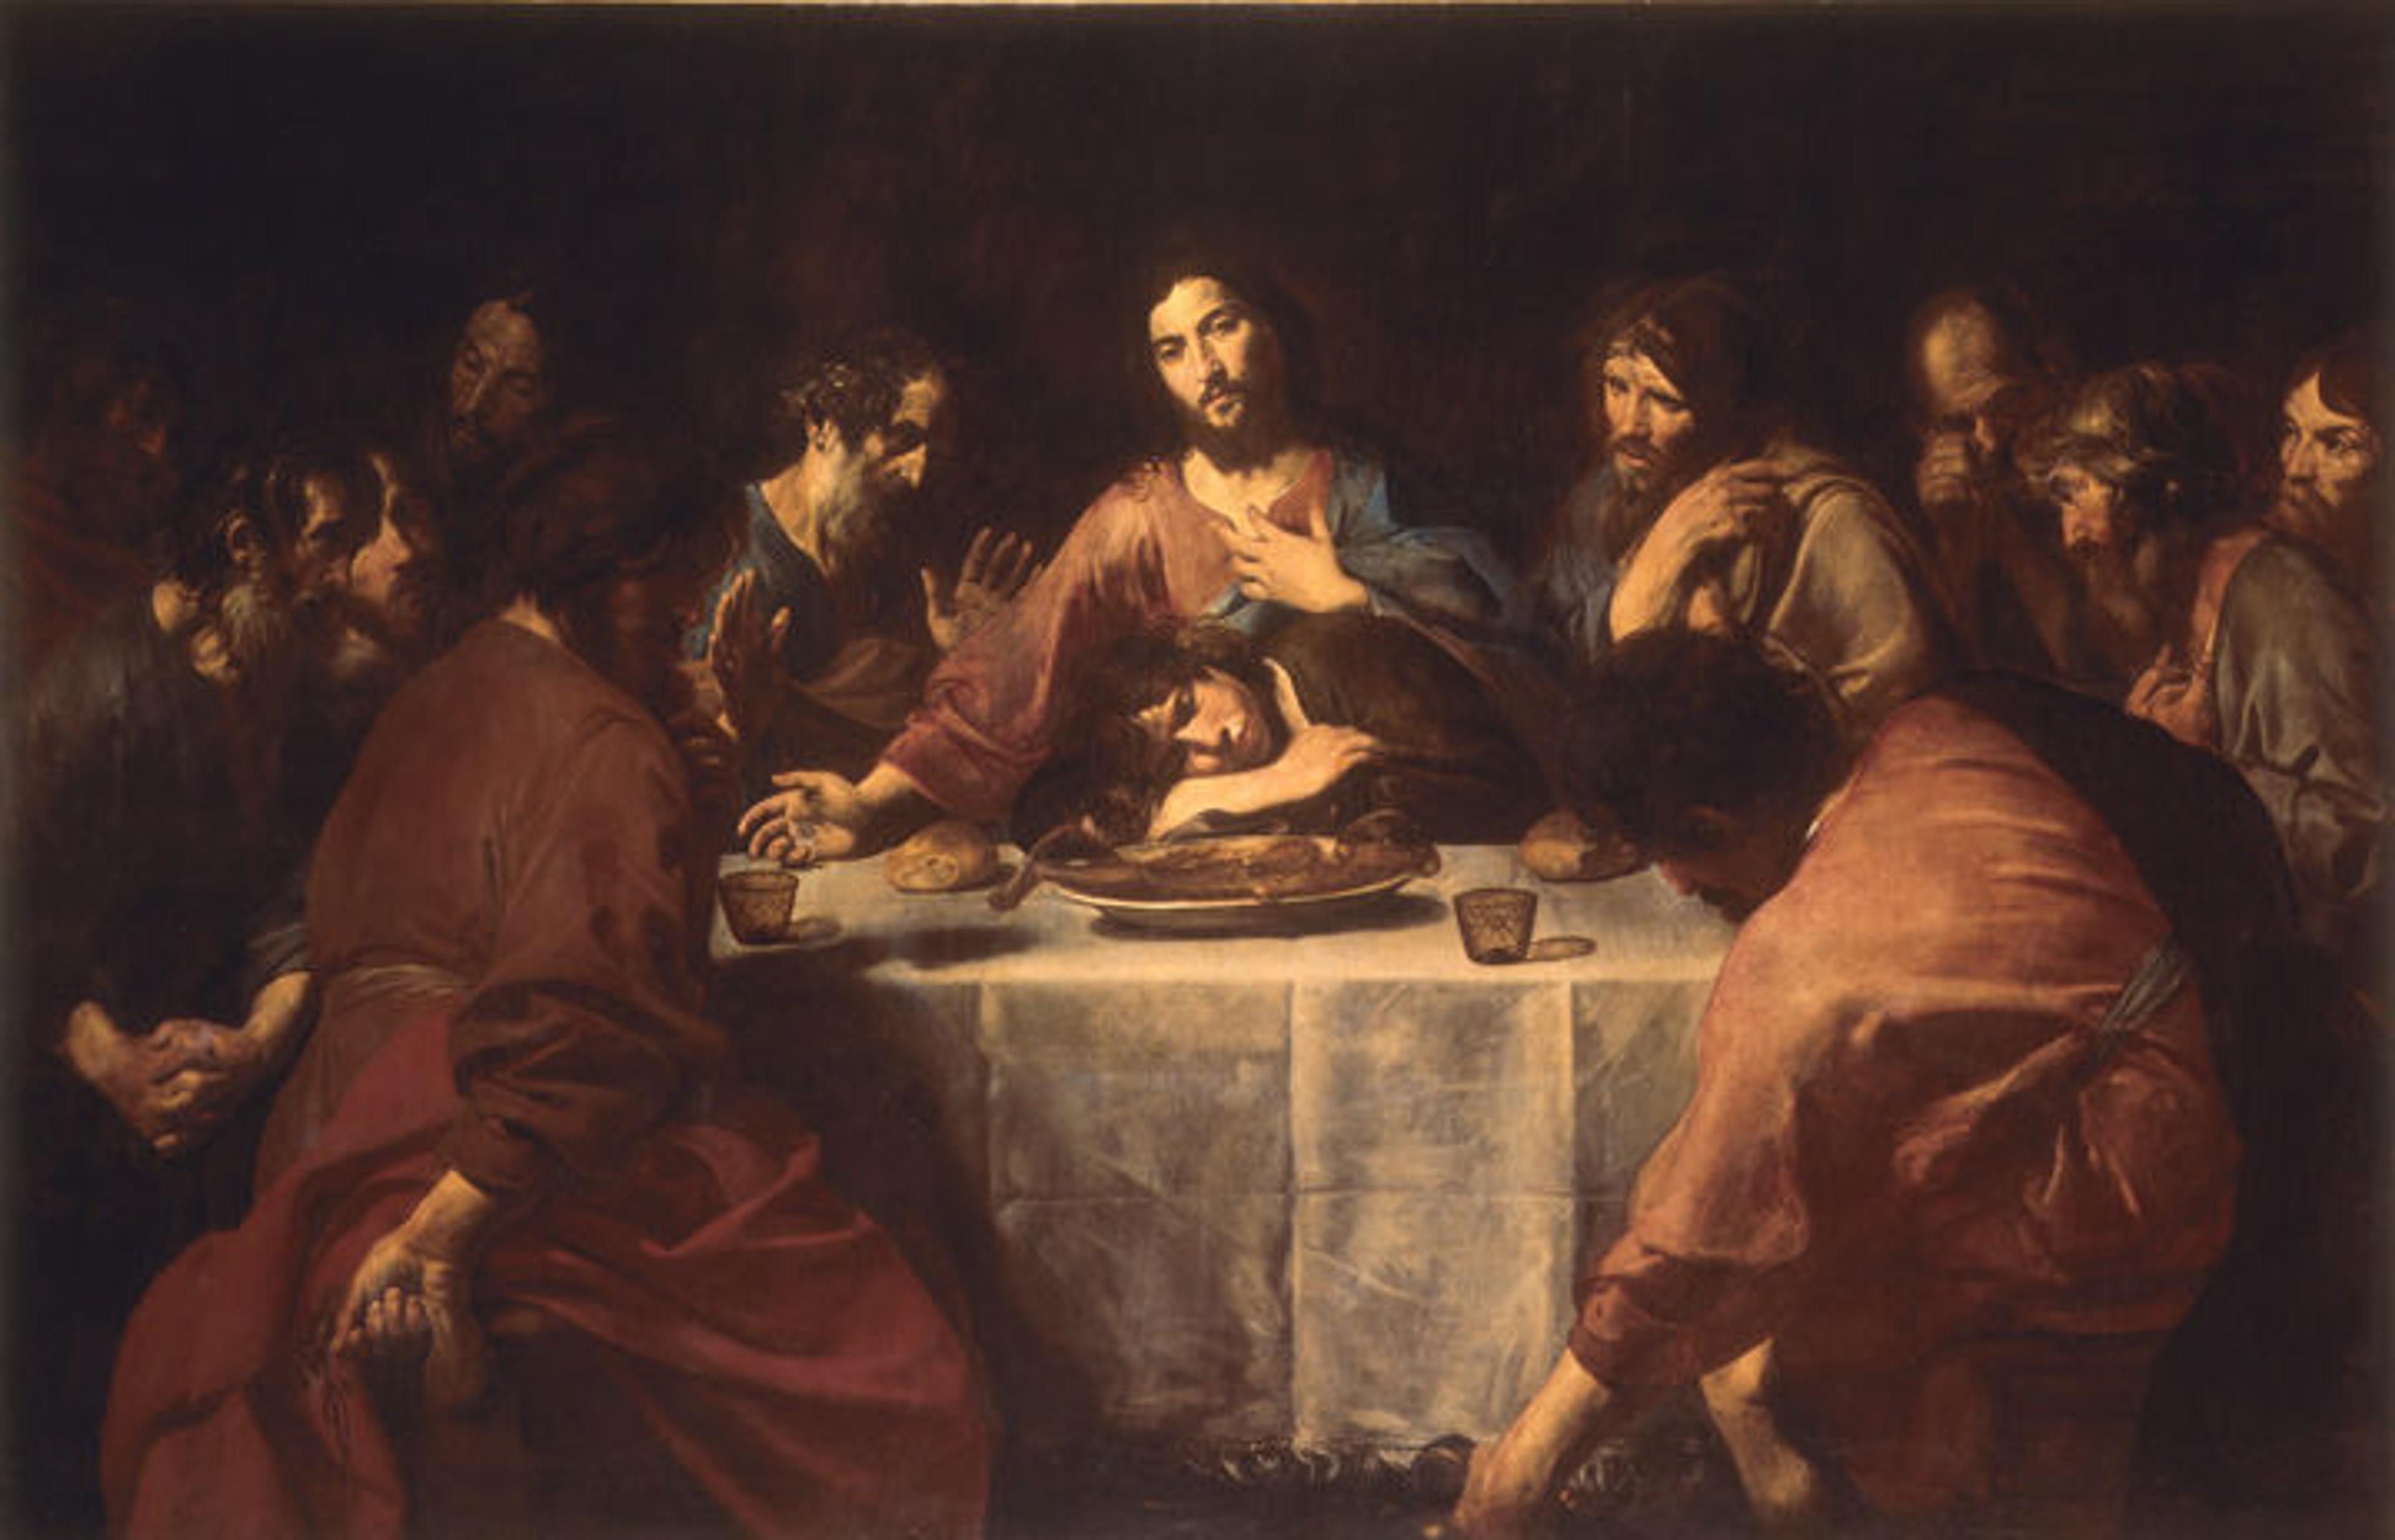 Early 17th-century painting of the Last Supper showing Jesus at a table surrounded by his disciples